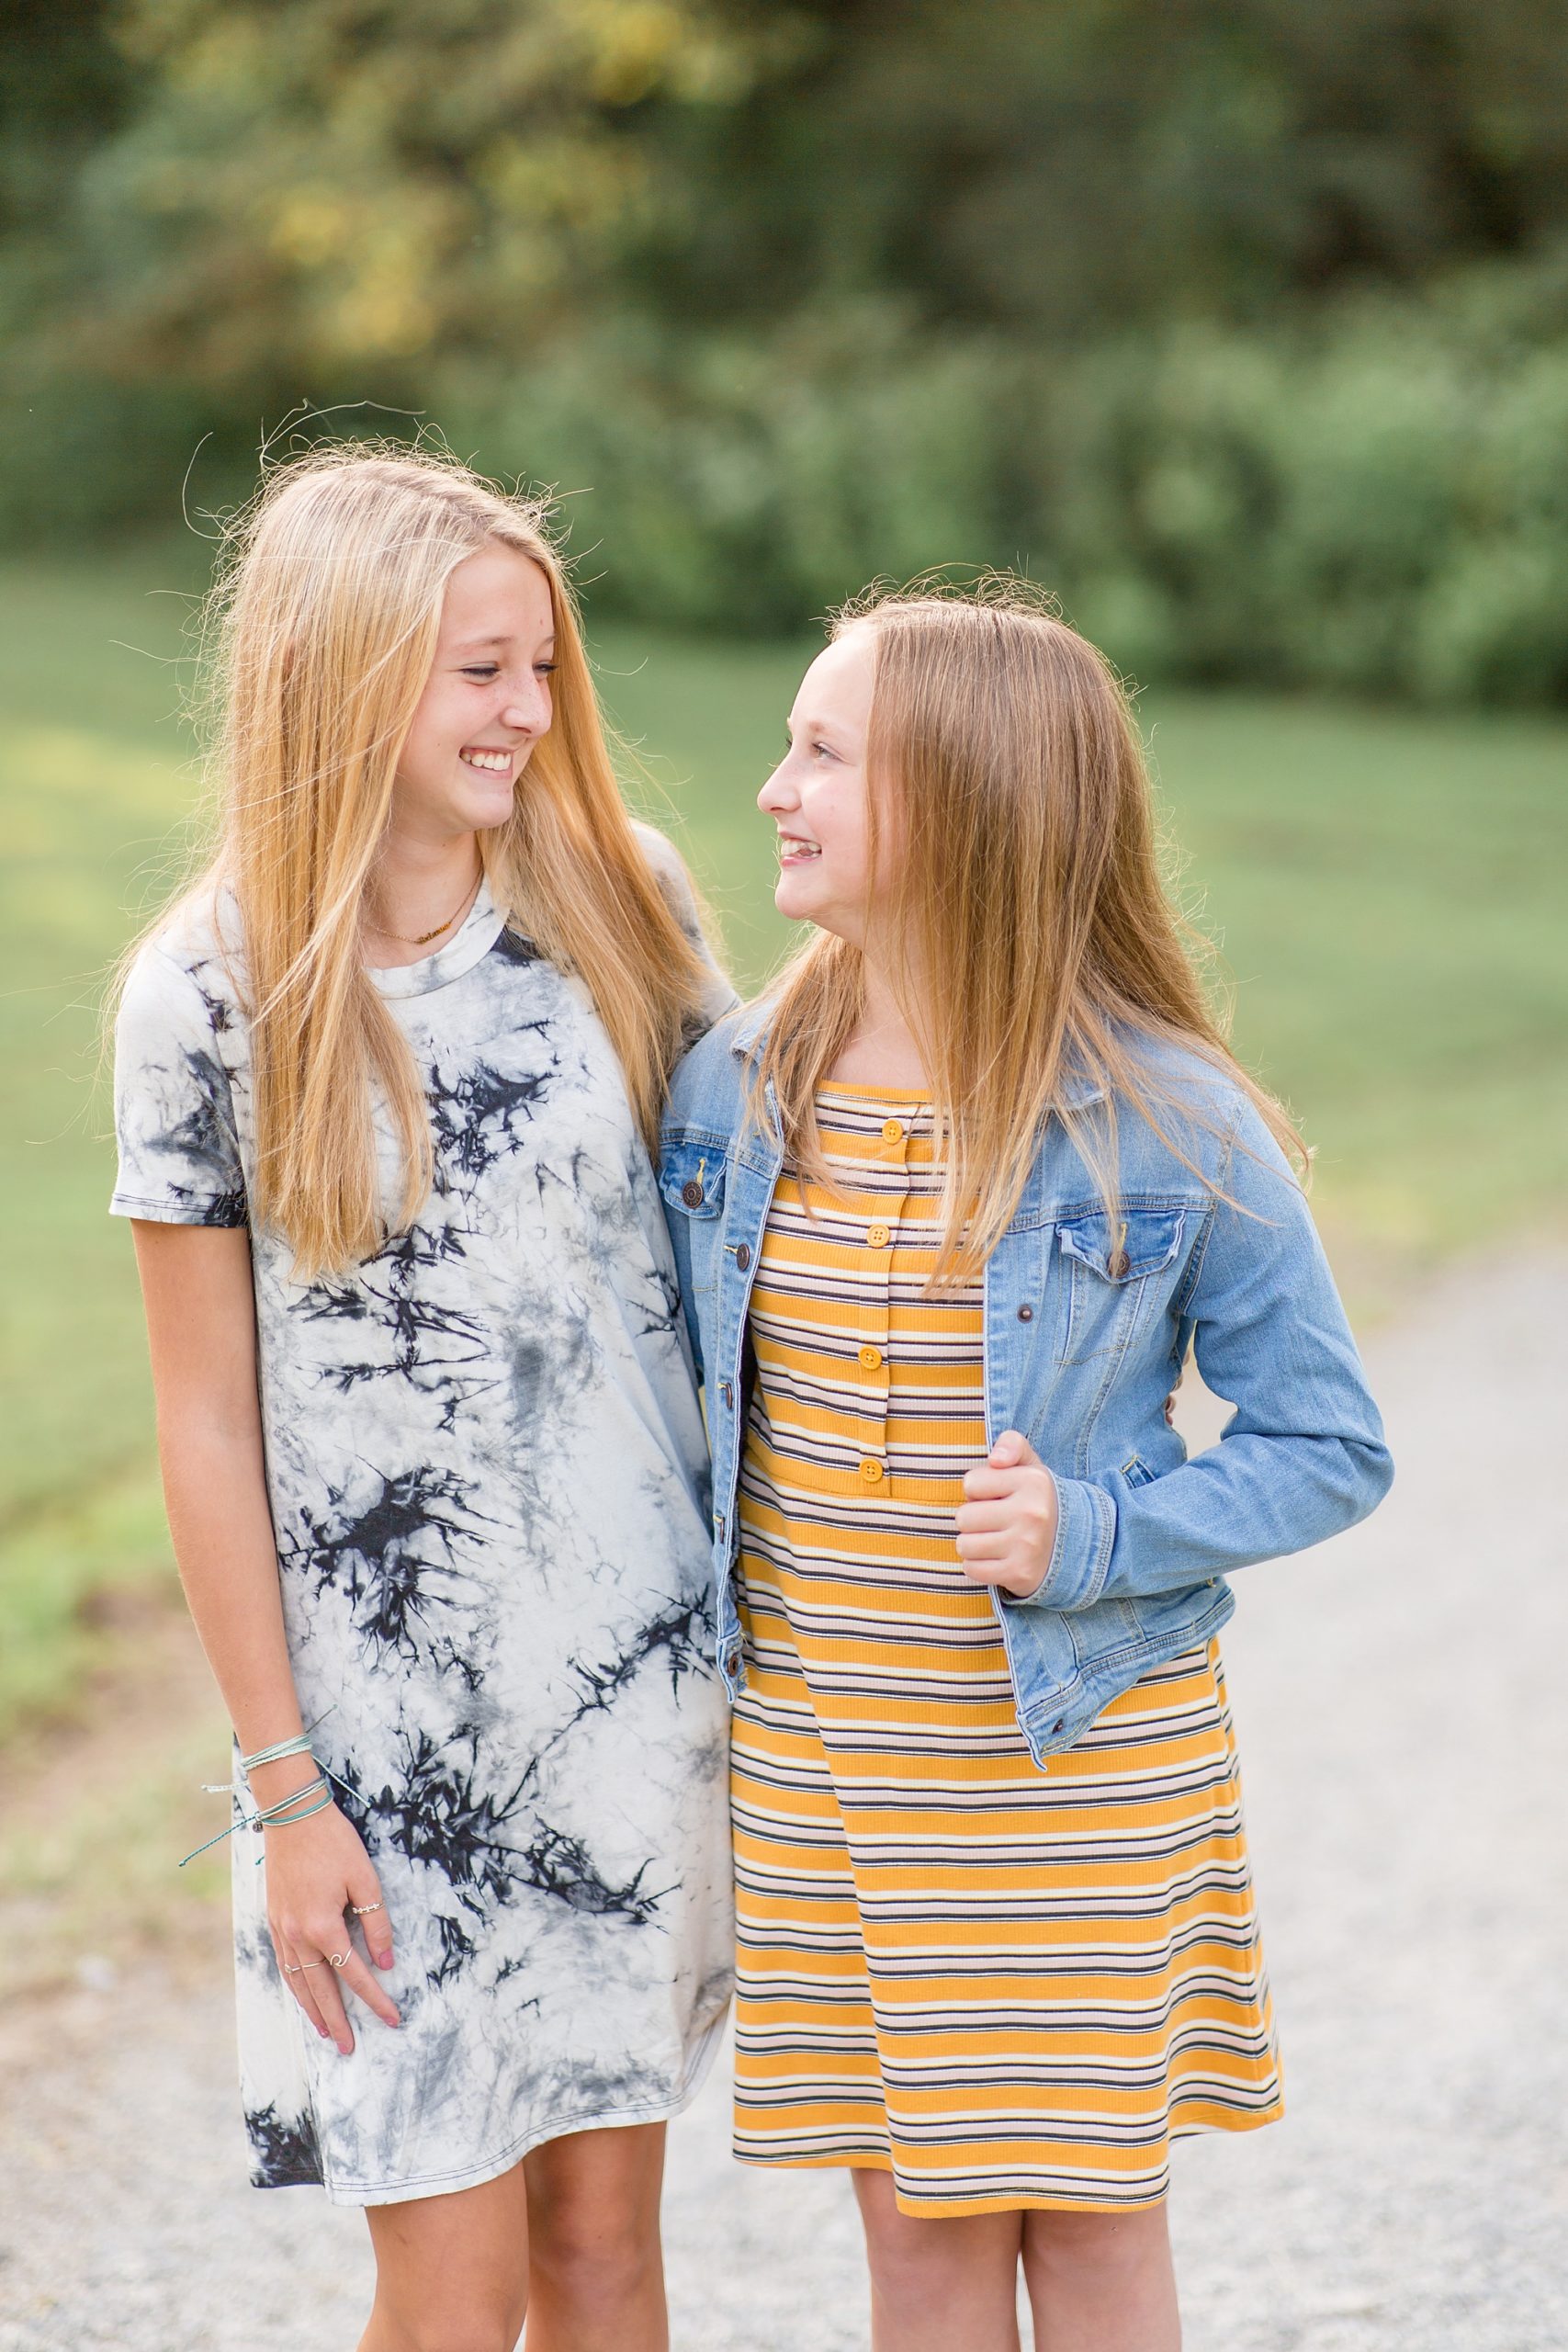 sisters smile at each other in blue and yellow dresses